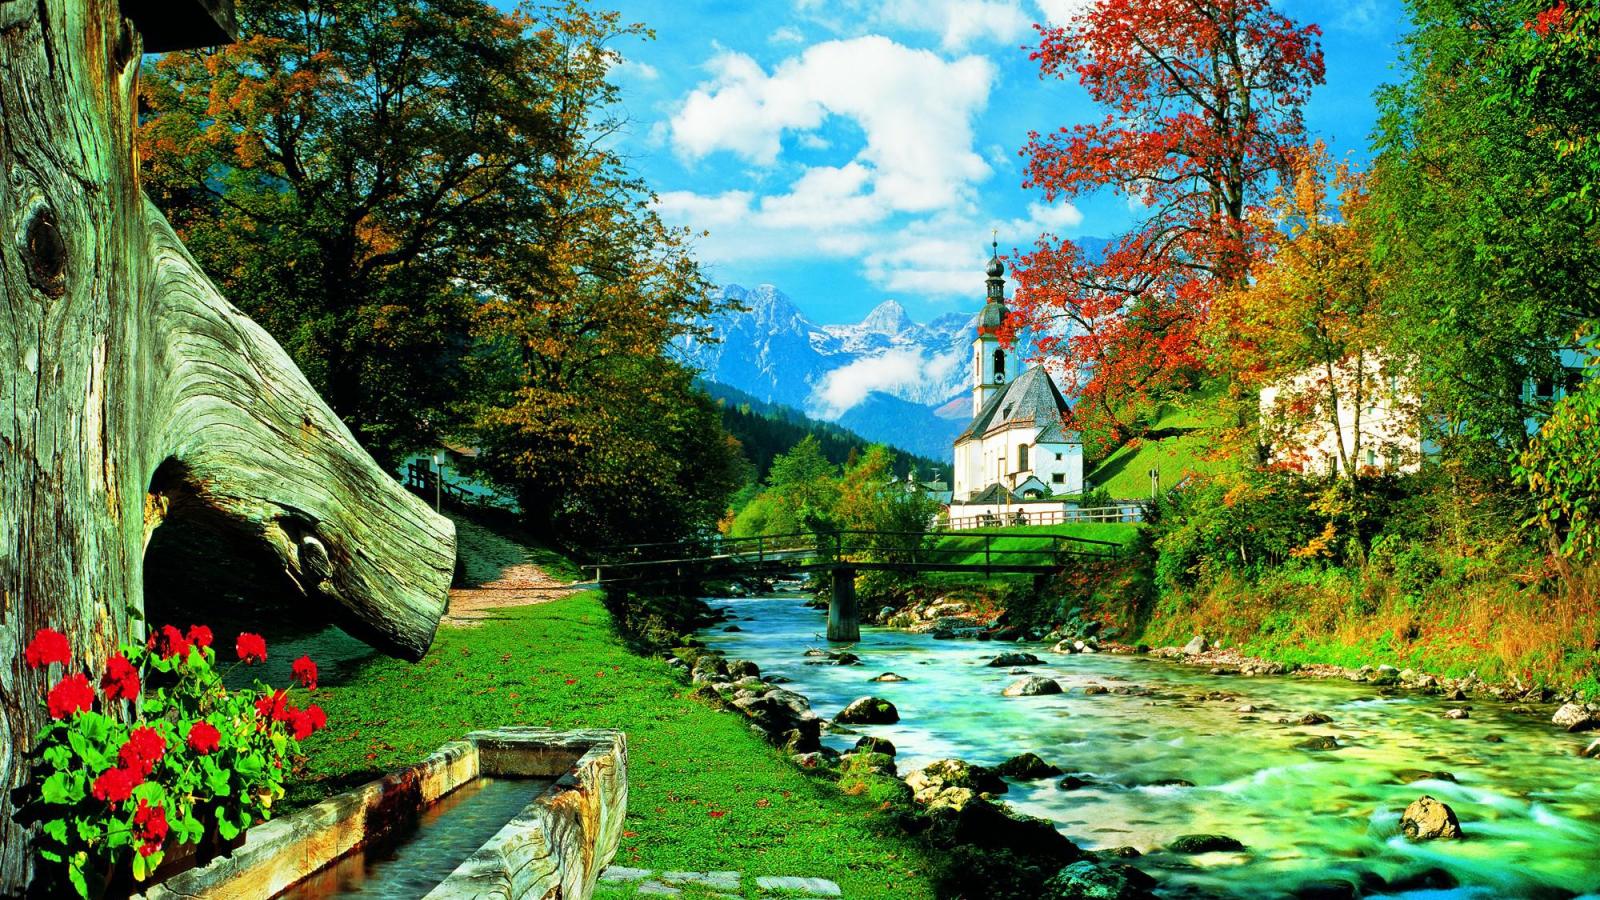 Bavarian Alps High Quality And Resolution Wallpaper On